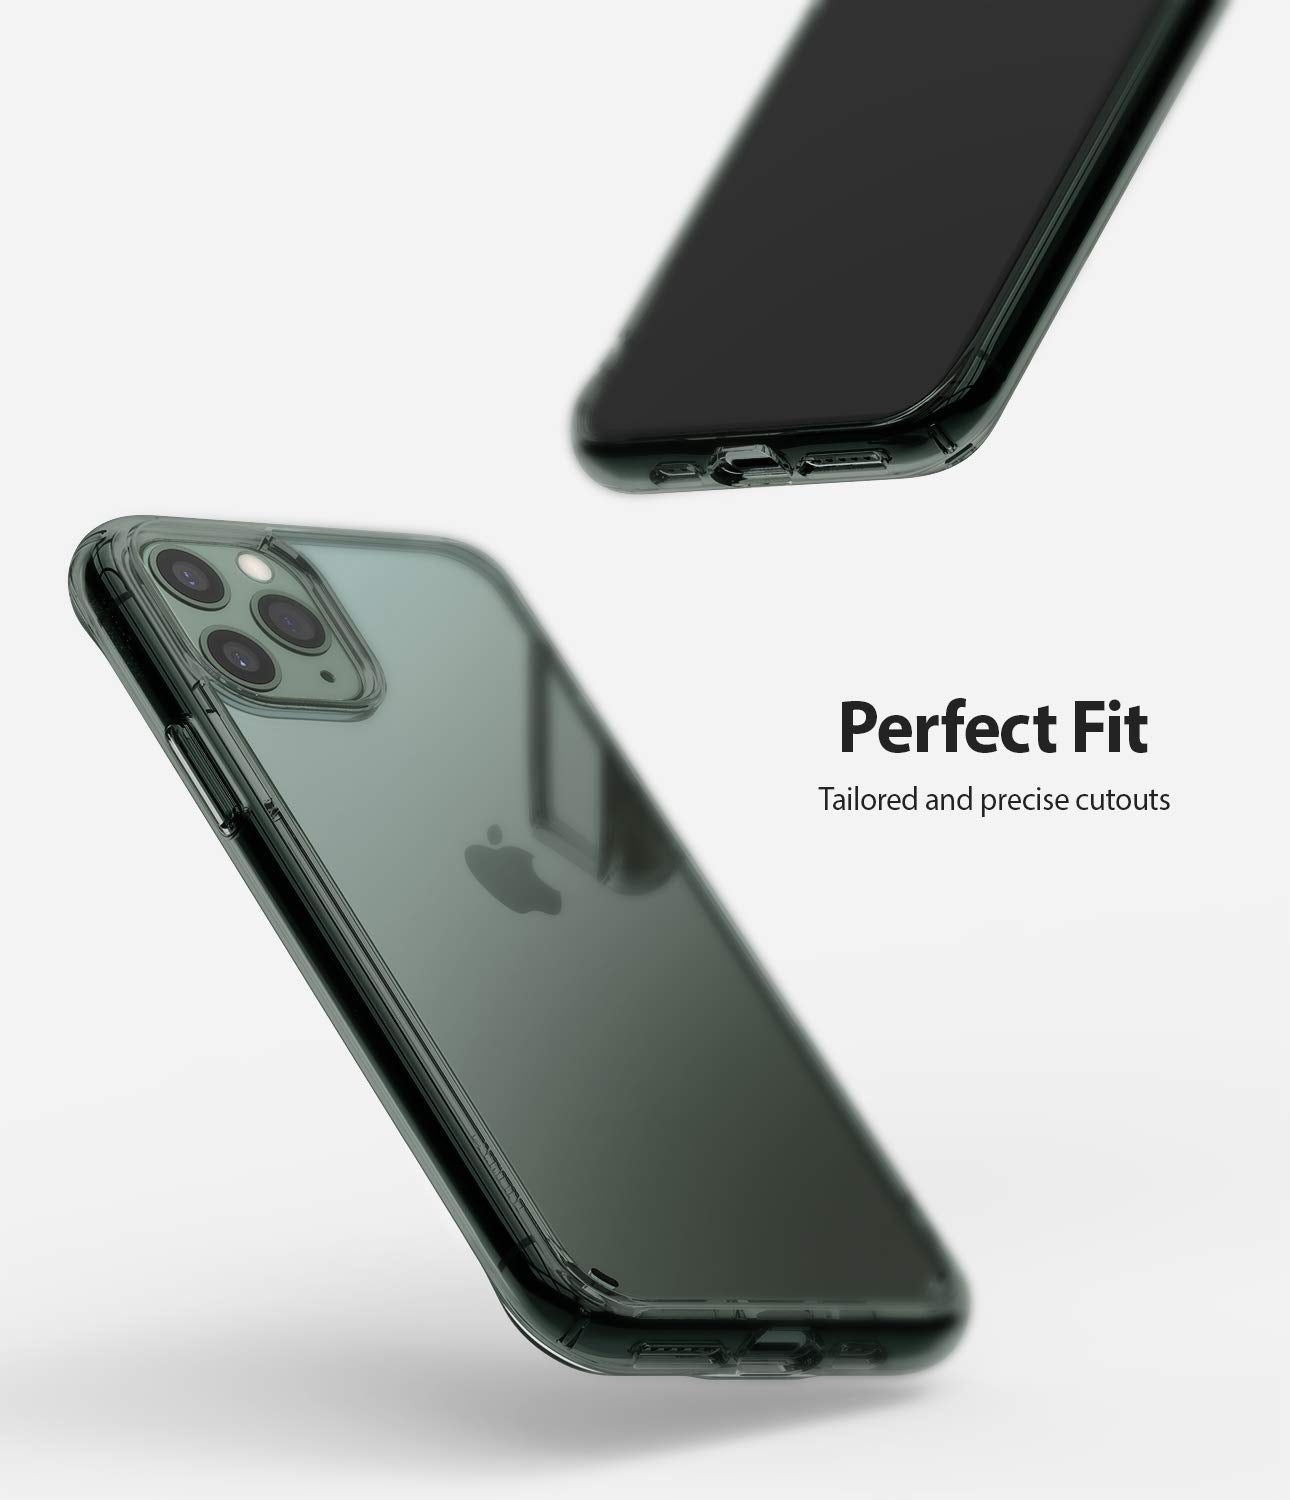 Apple iPhone 11 Pro Max Back Cover Case